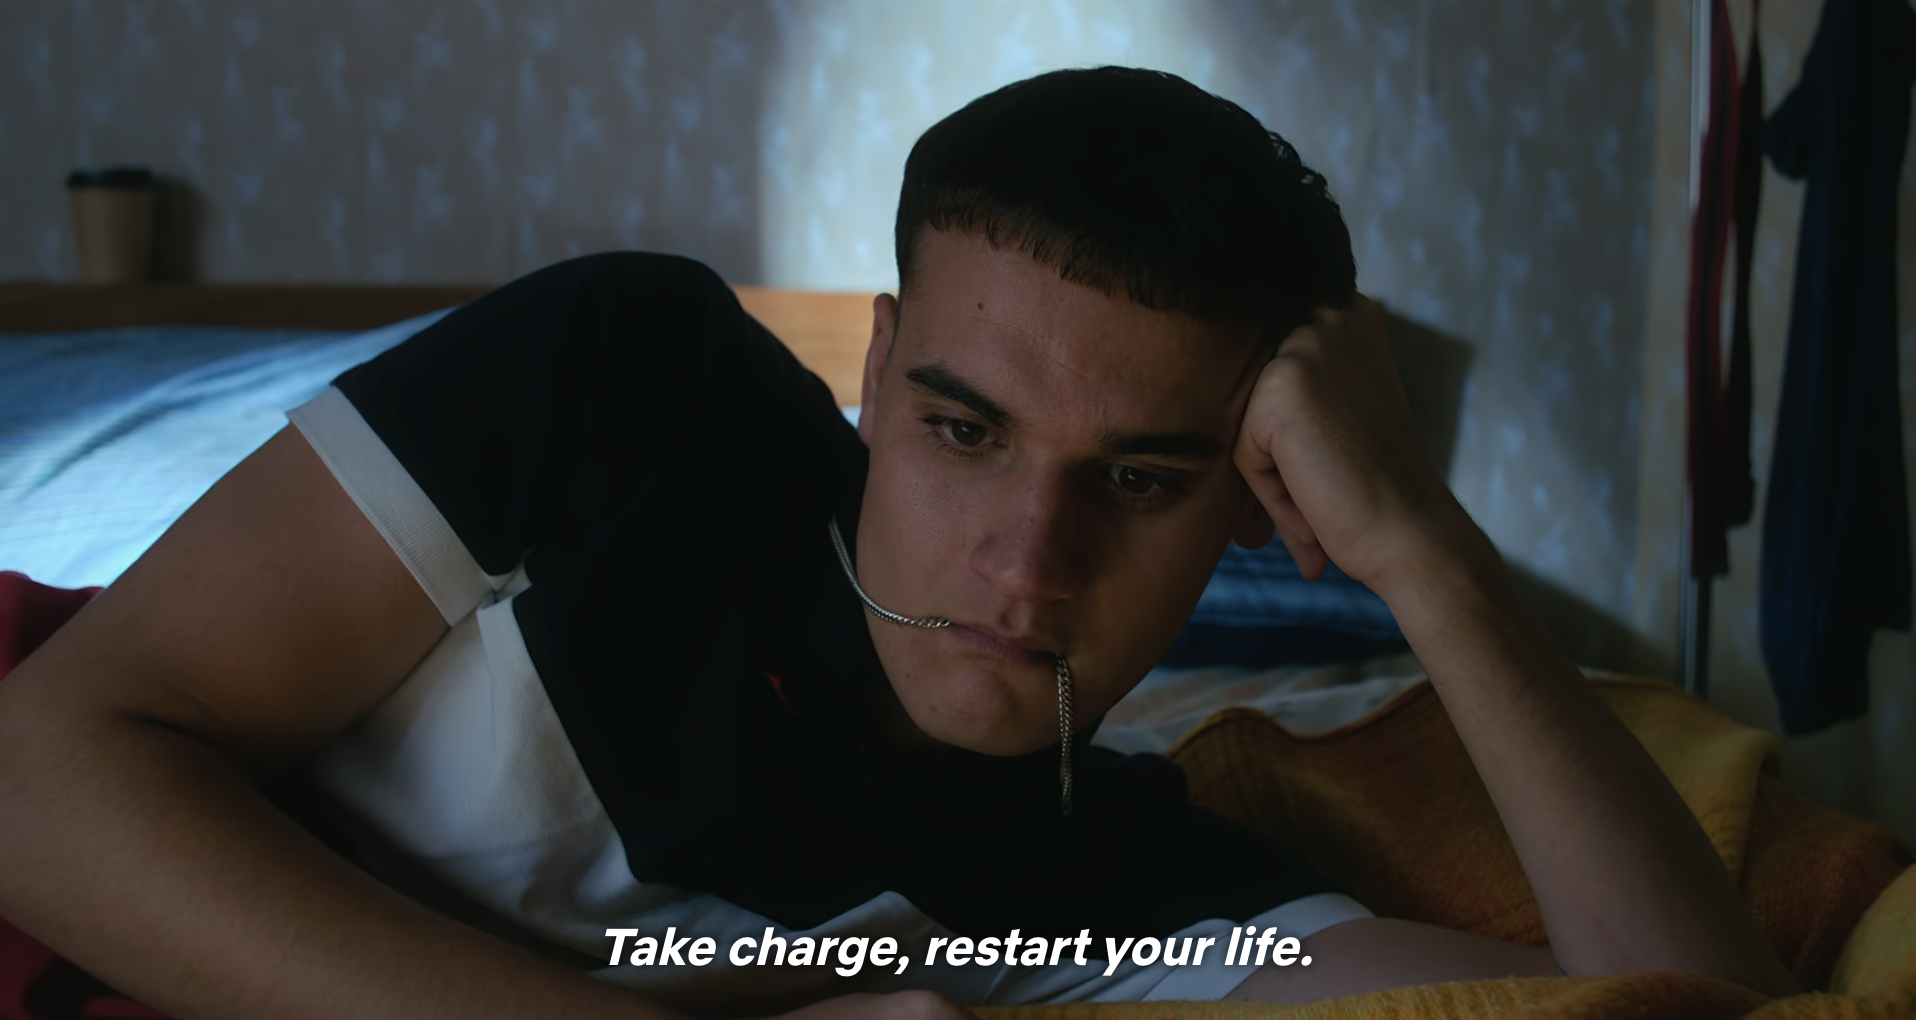 Person lying on bed with a pen in mouth, looking pensive. Text: &quot;Take charge, restart your life.&quot;